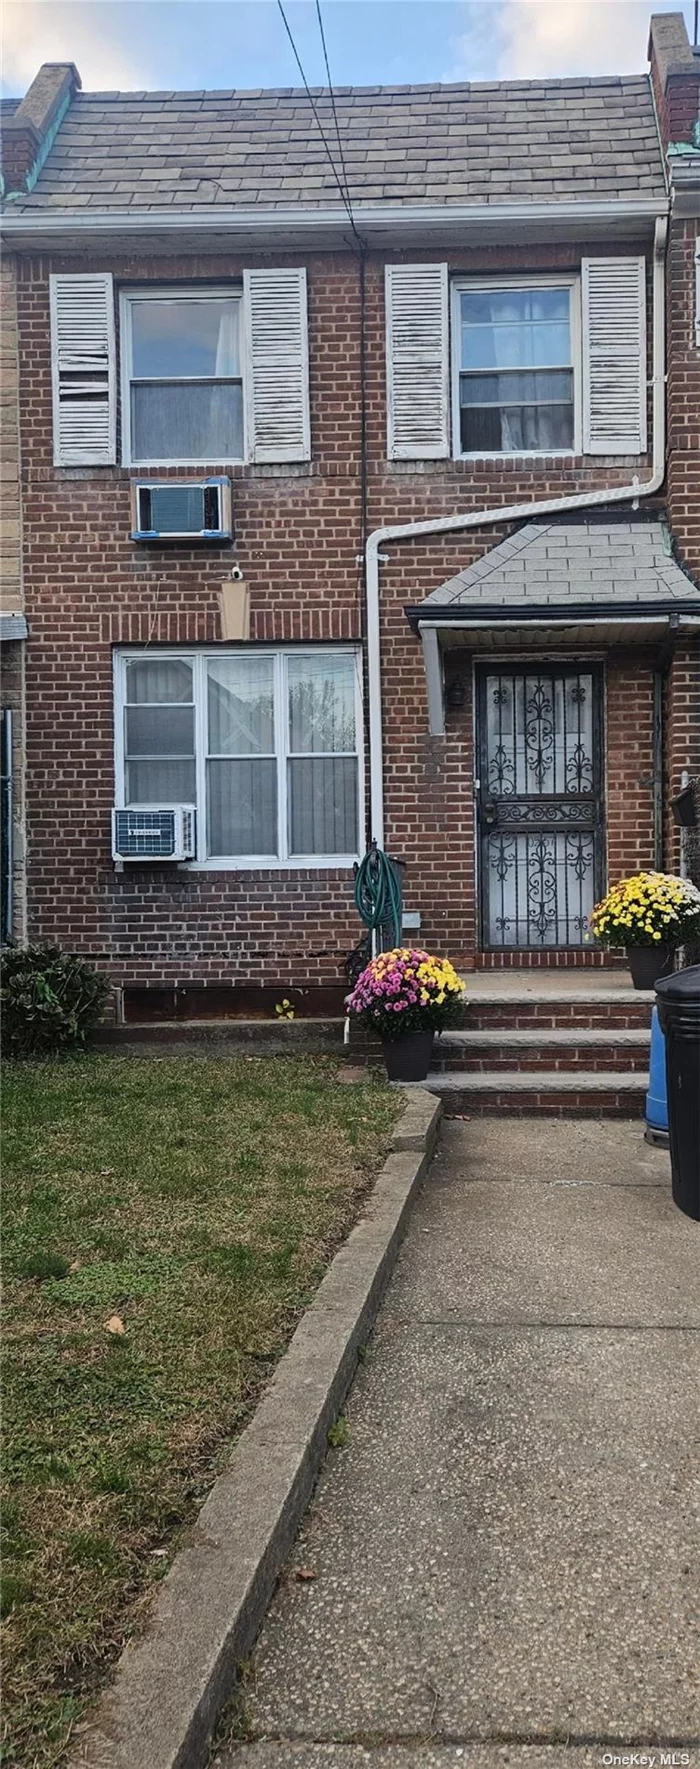 Welcome to this 2-bedroom, 1-home located in Forest Hills. This property features a Porch, 1 indoor garage + 2 parking spots(out). Close to shops, schools, trains, buses, restaurants and more!